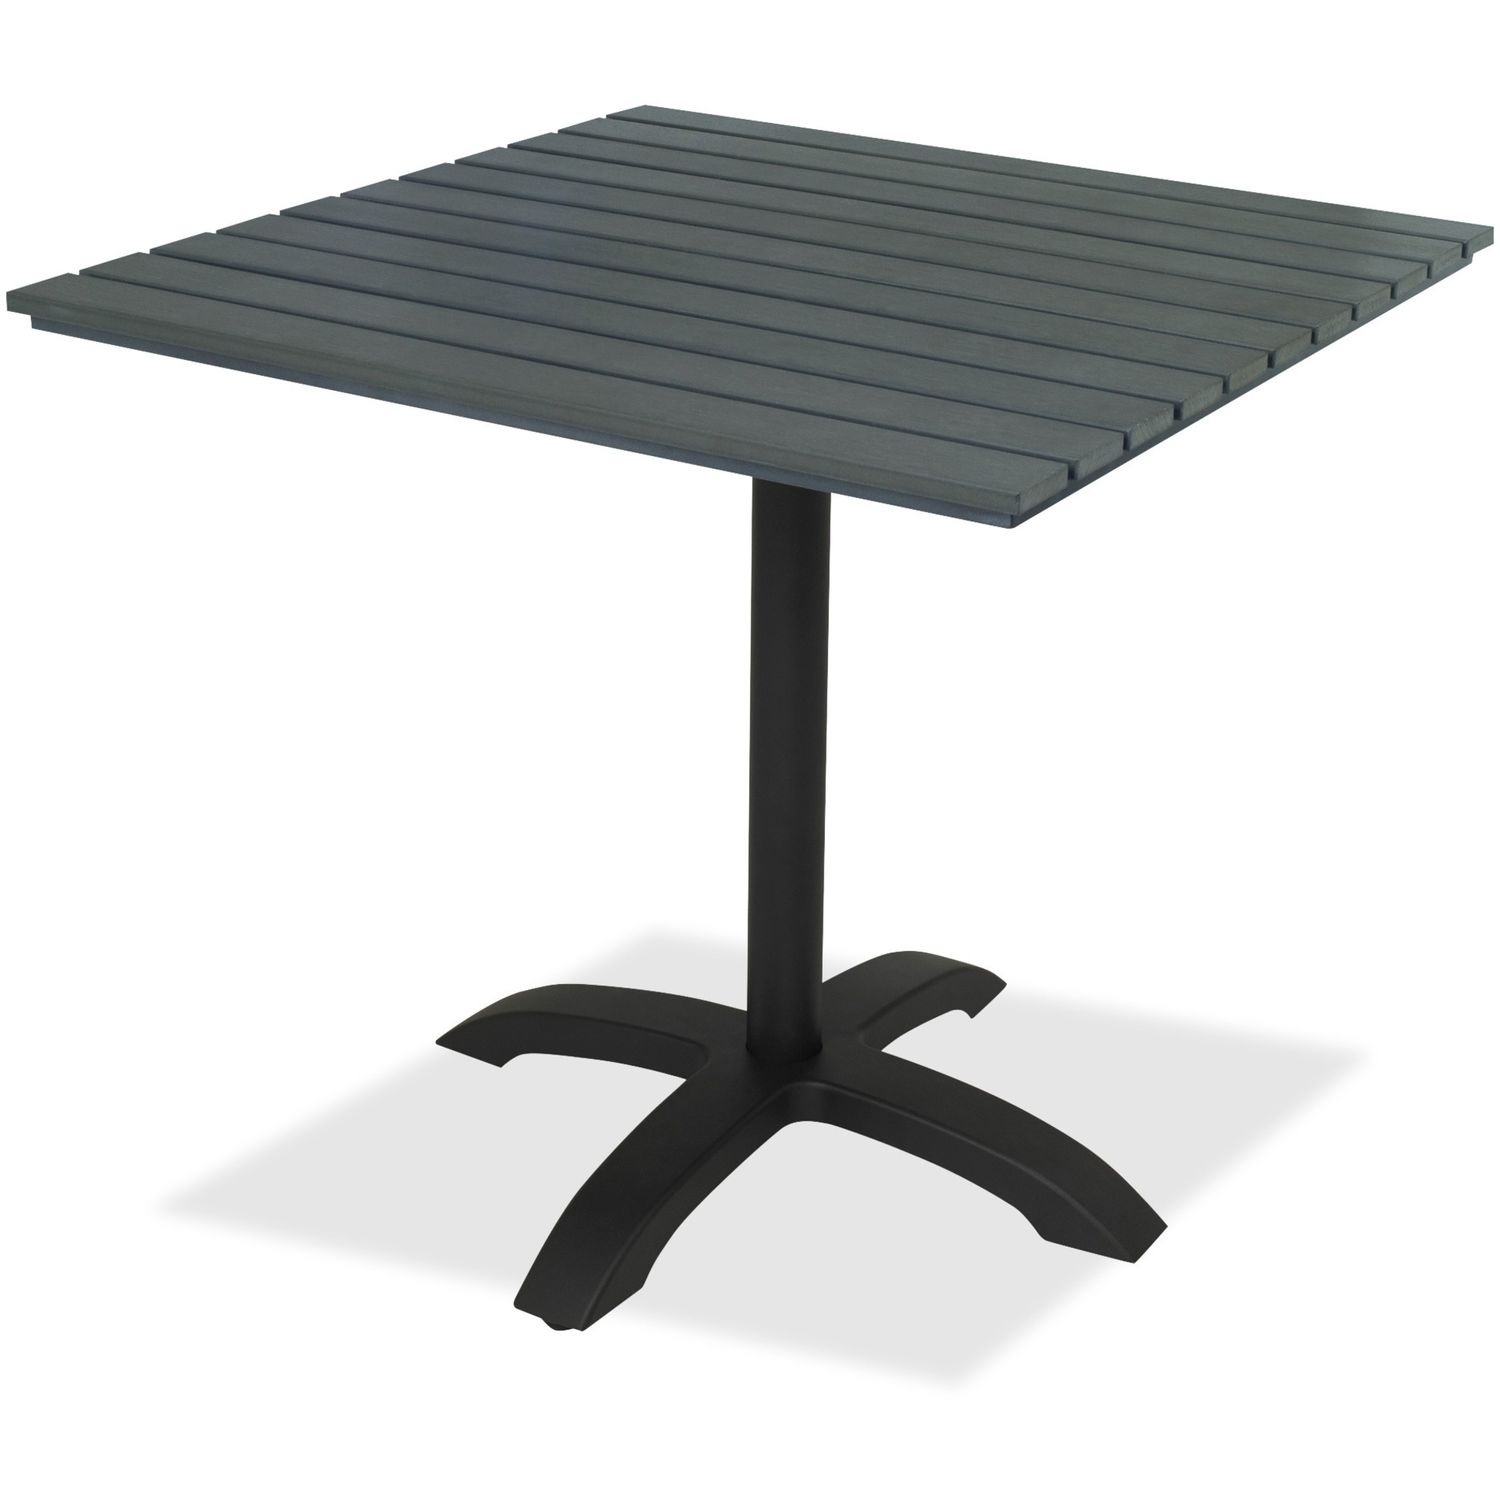 Eveleen Outdoor Table Square Top, 32" Table Top Length x 32" Table Top Width, Assembly Required, Gray, Aluminum, Synthetic Polymer